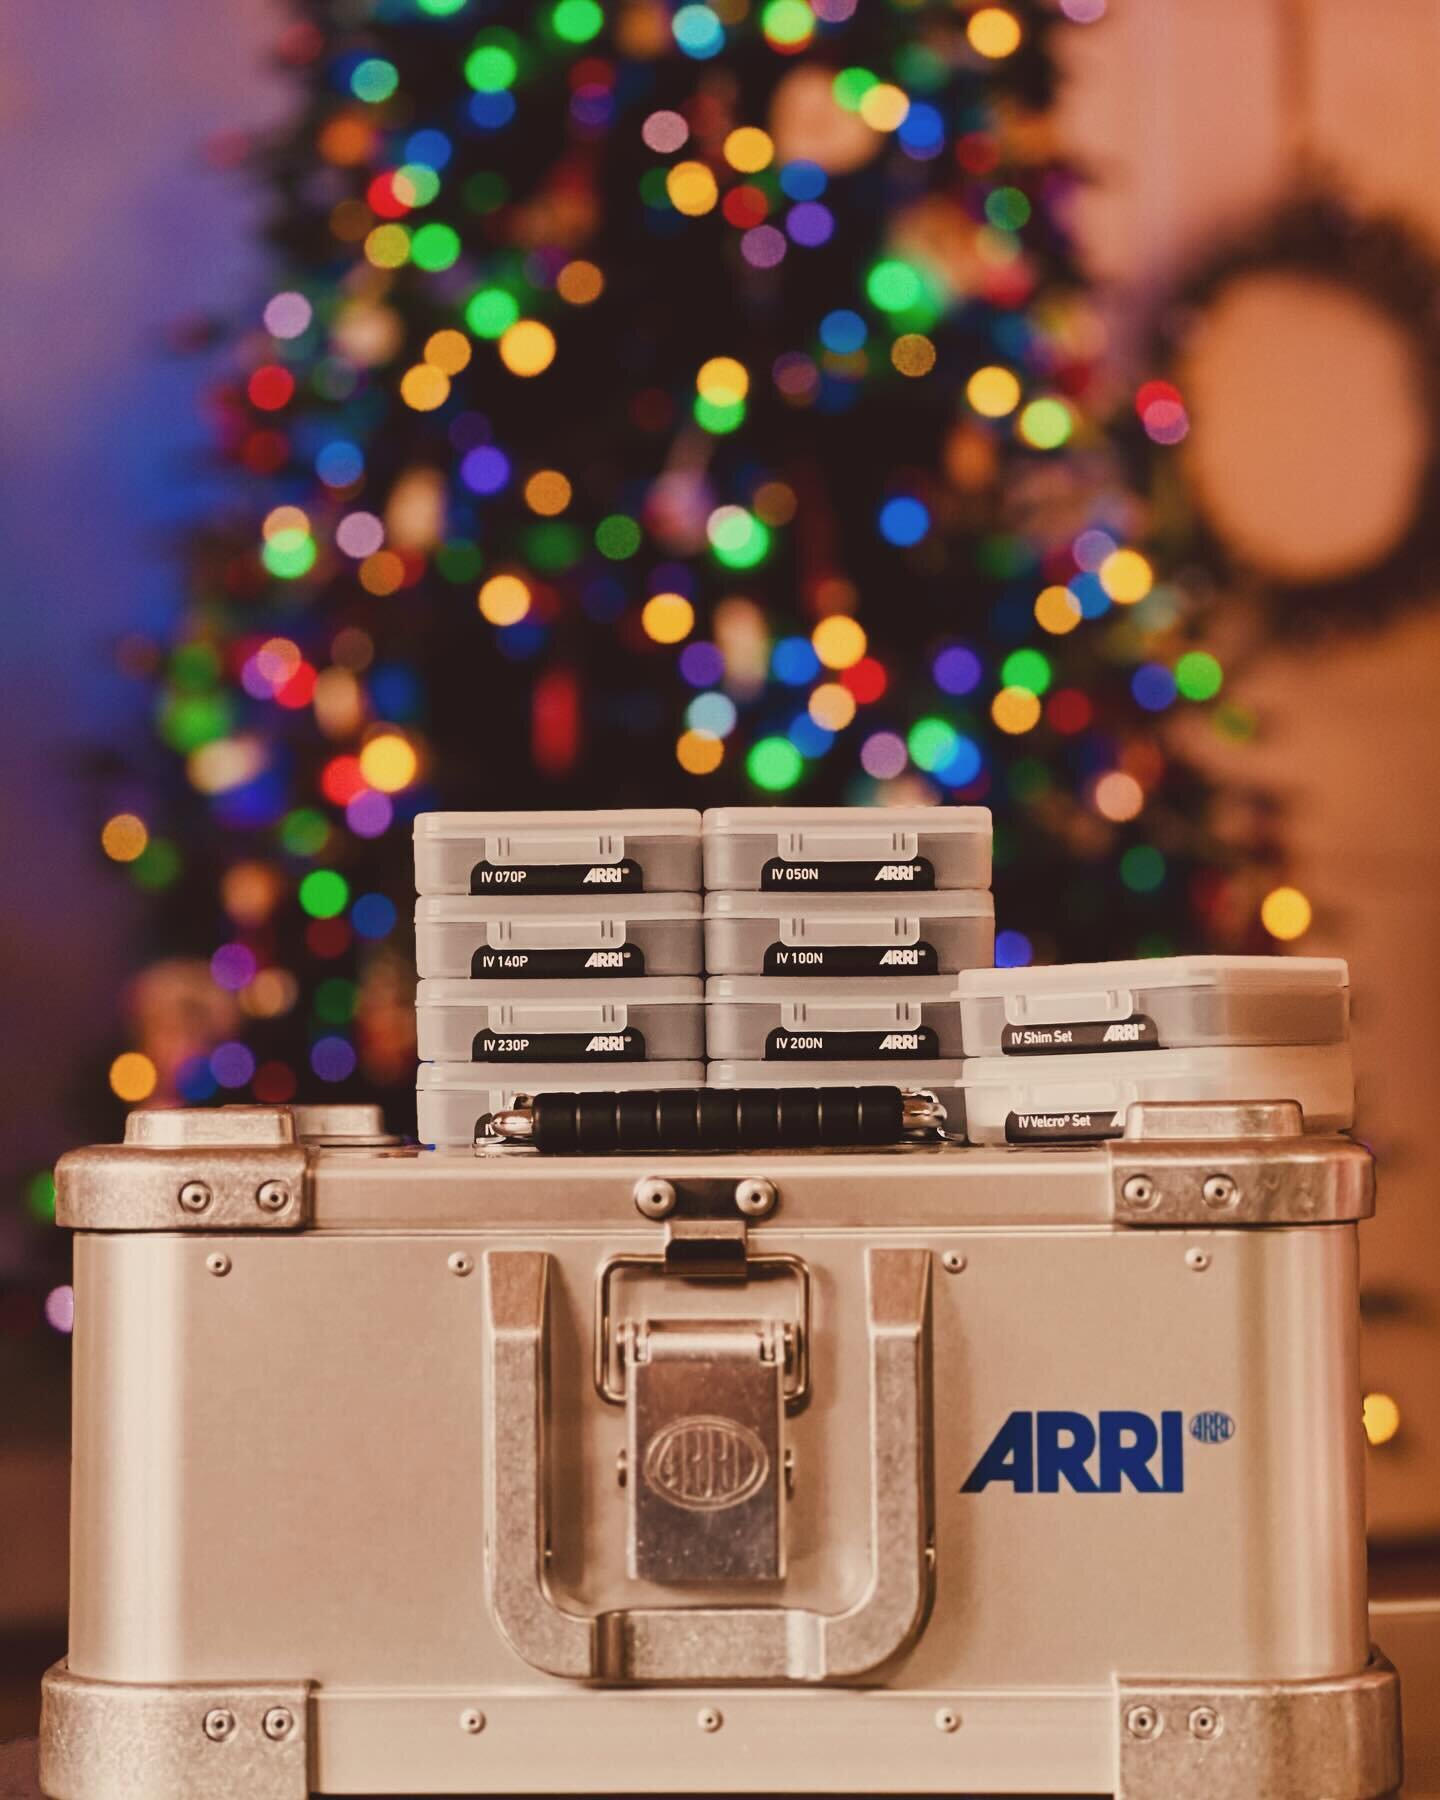 Arri Impressions Filter set avail for rent! Gives the signature primes a little more of a vintage feel, in positive or negative strengths. Easiest way to see the effect is with Arri&rsquo;s online tool: https://www.arri.com/en/camera-systems/cine-len